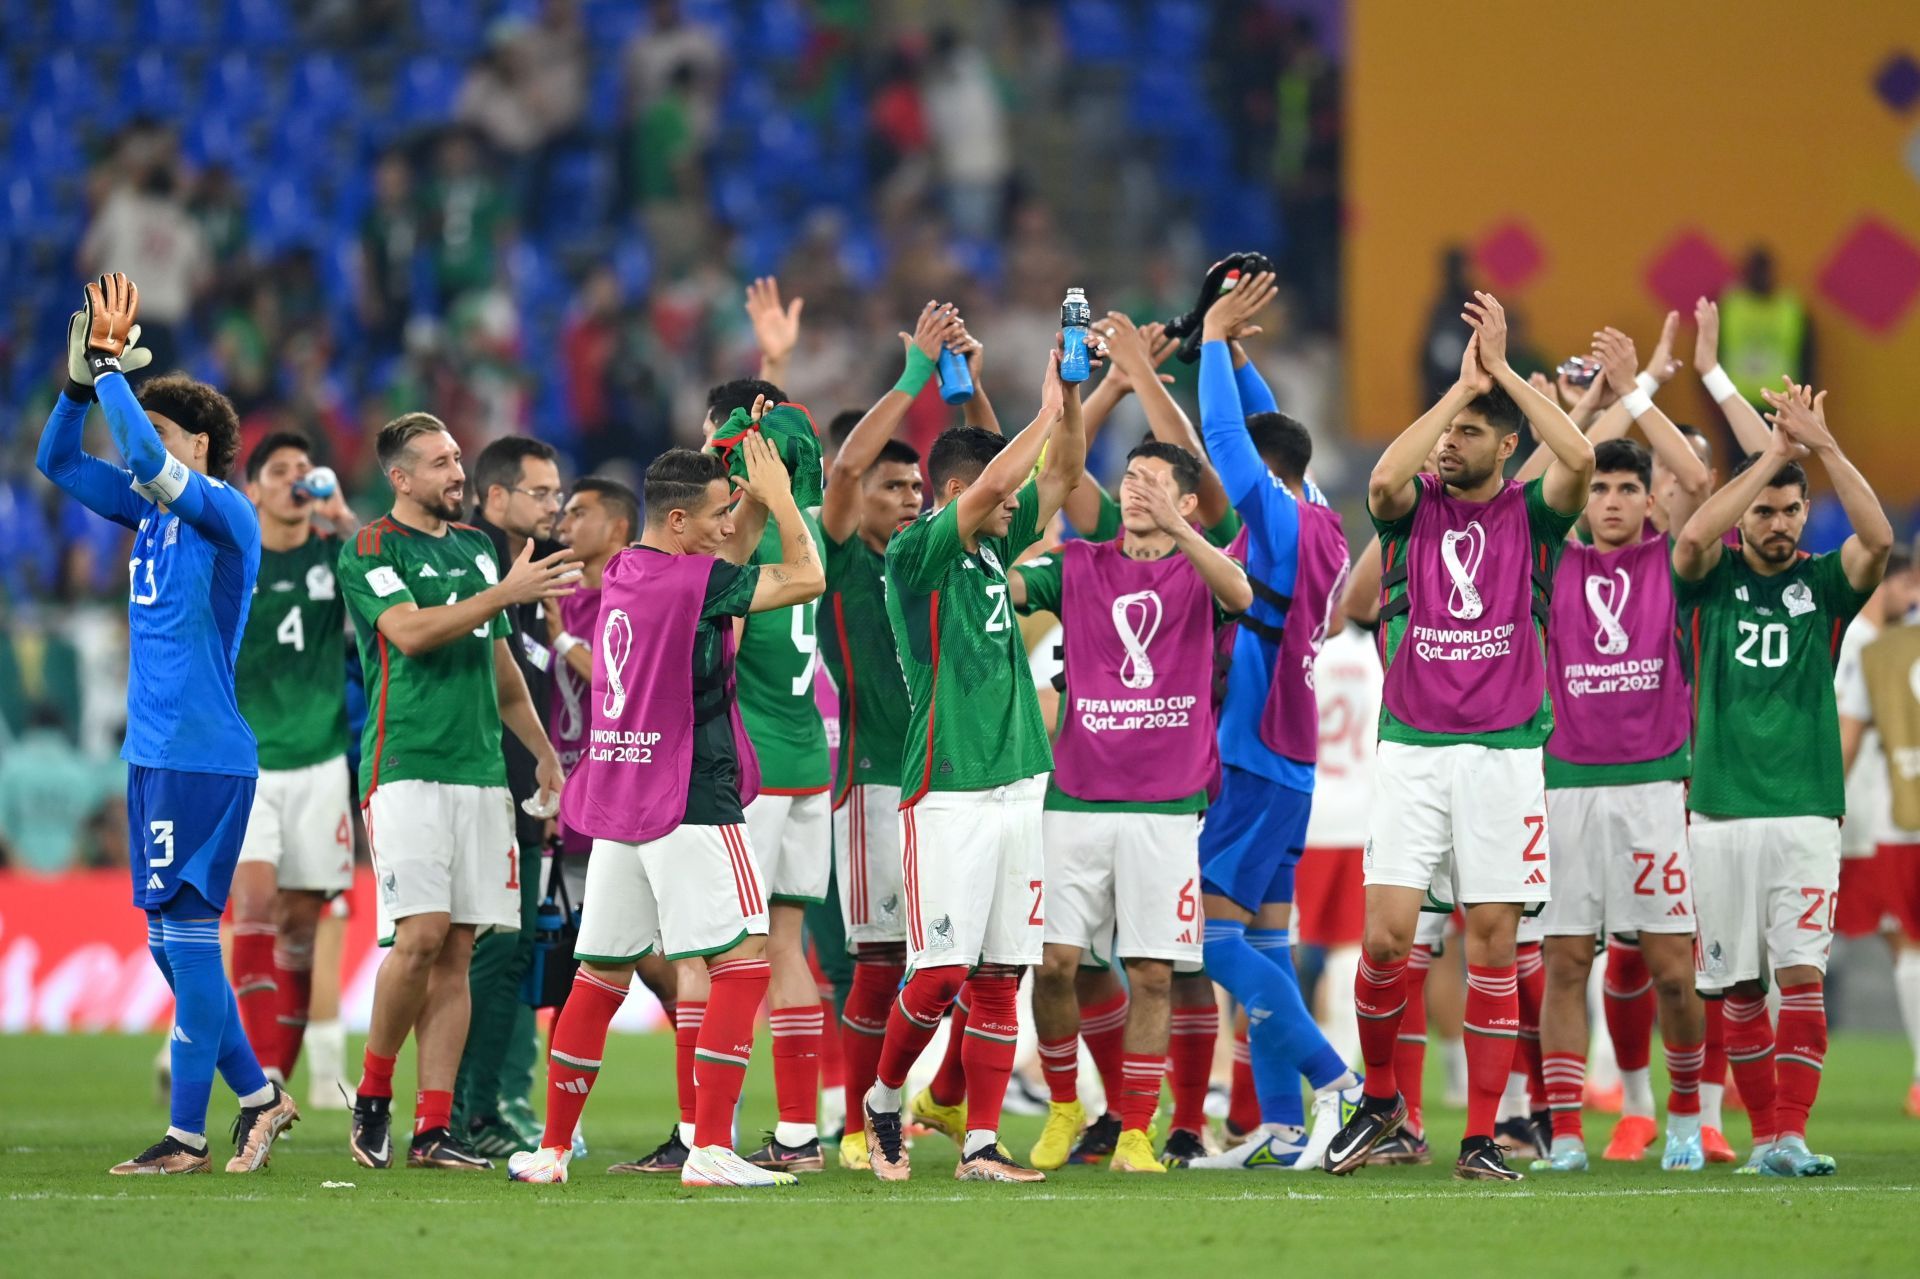 Mexico will face Argentina in their next Group C game in Qatar